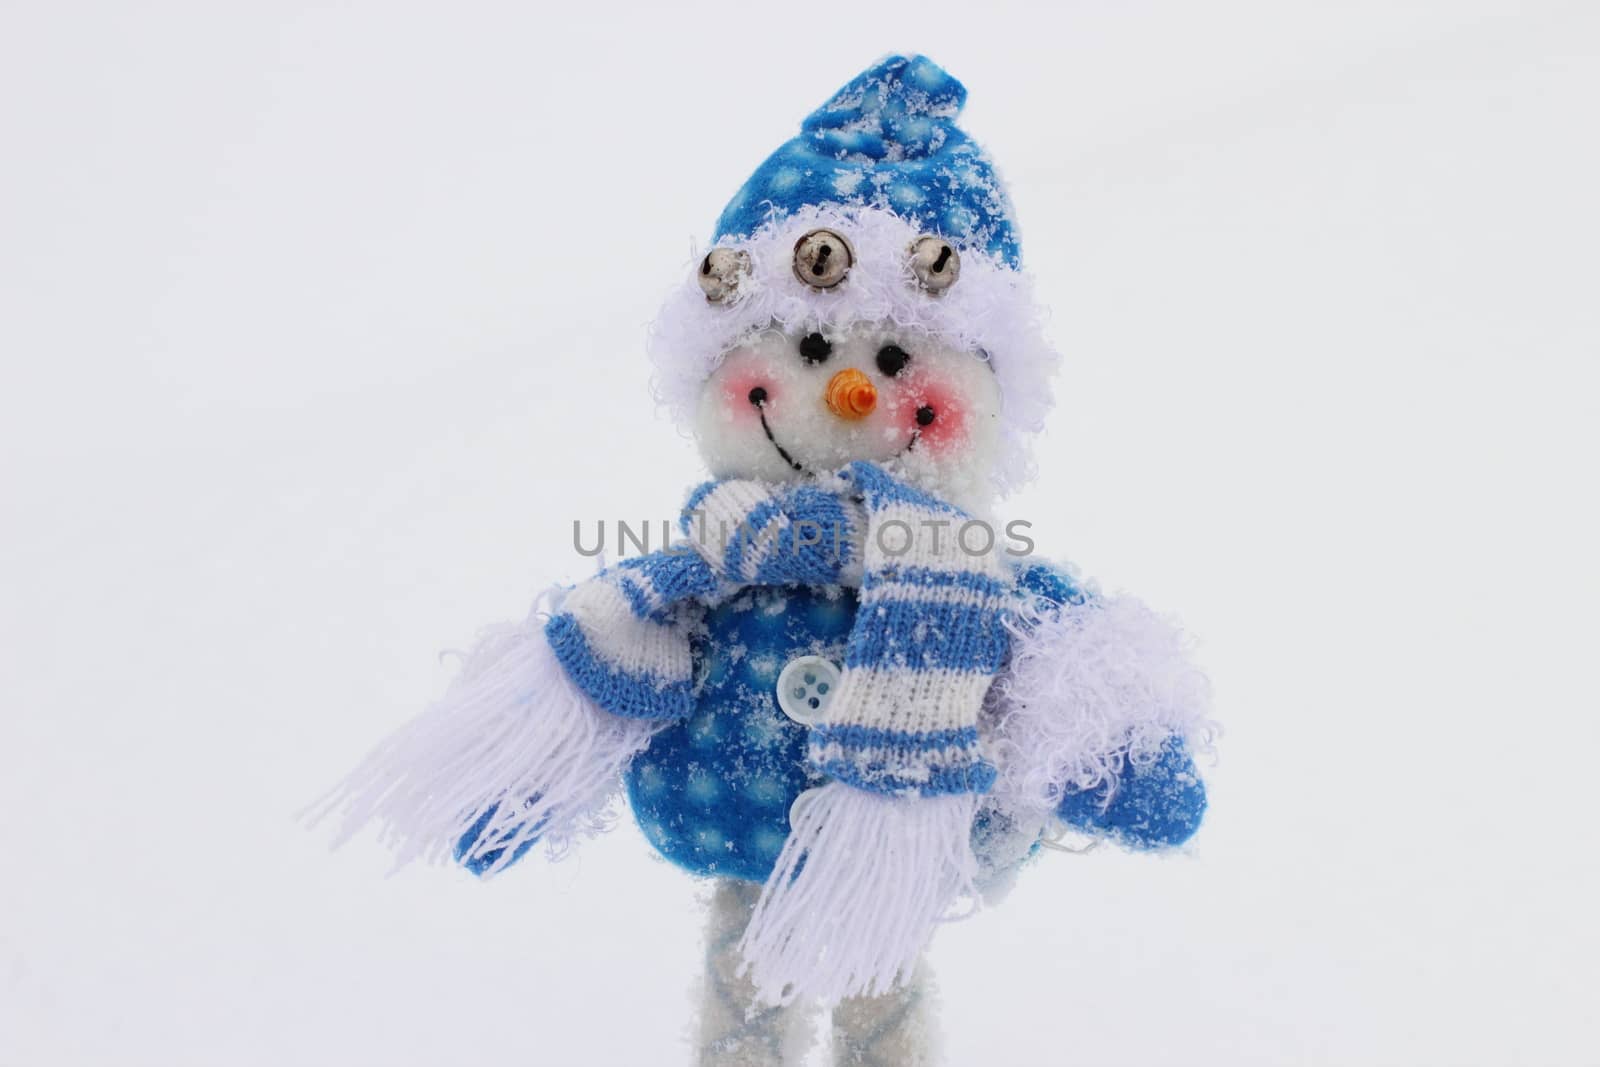 toy snowman in the street in winter clothes